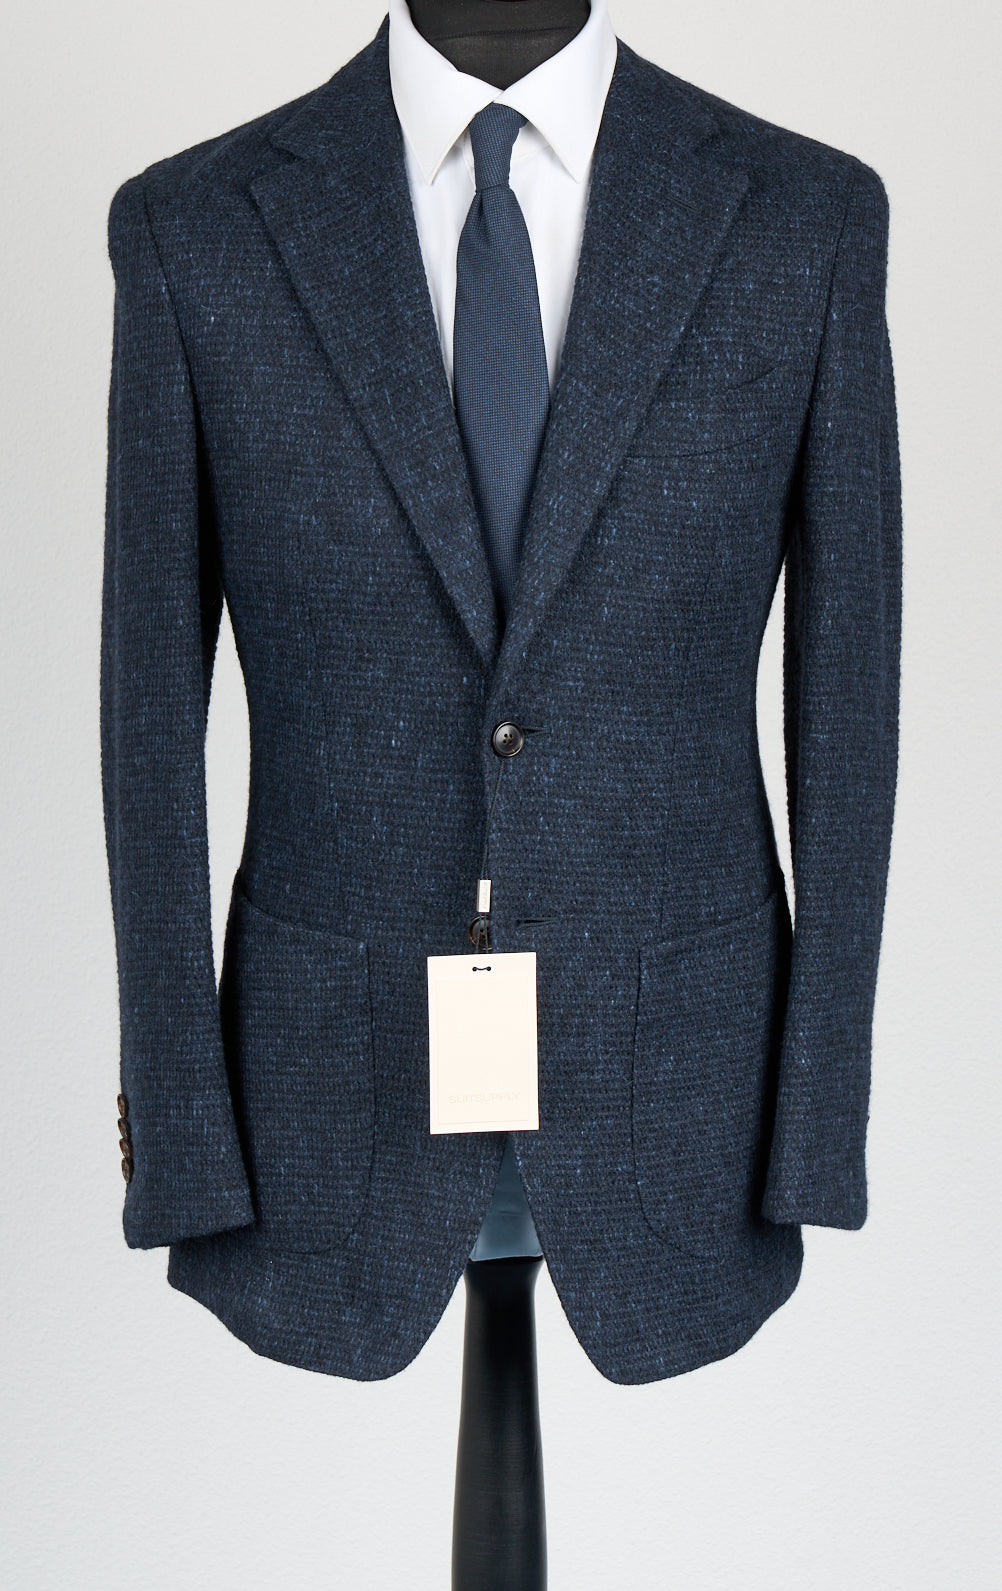 New Suitsupply Lazio Navy Alpaca, Wool and Linen Unlined Blazer - Size 38R and 40S